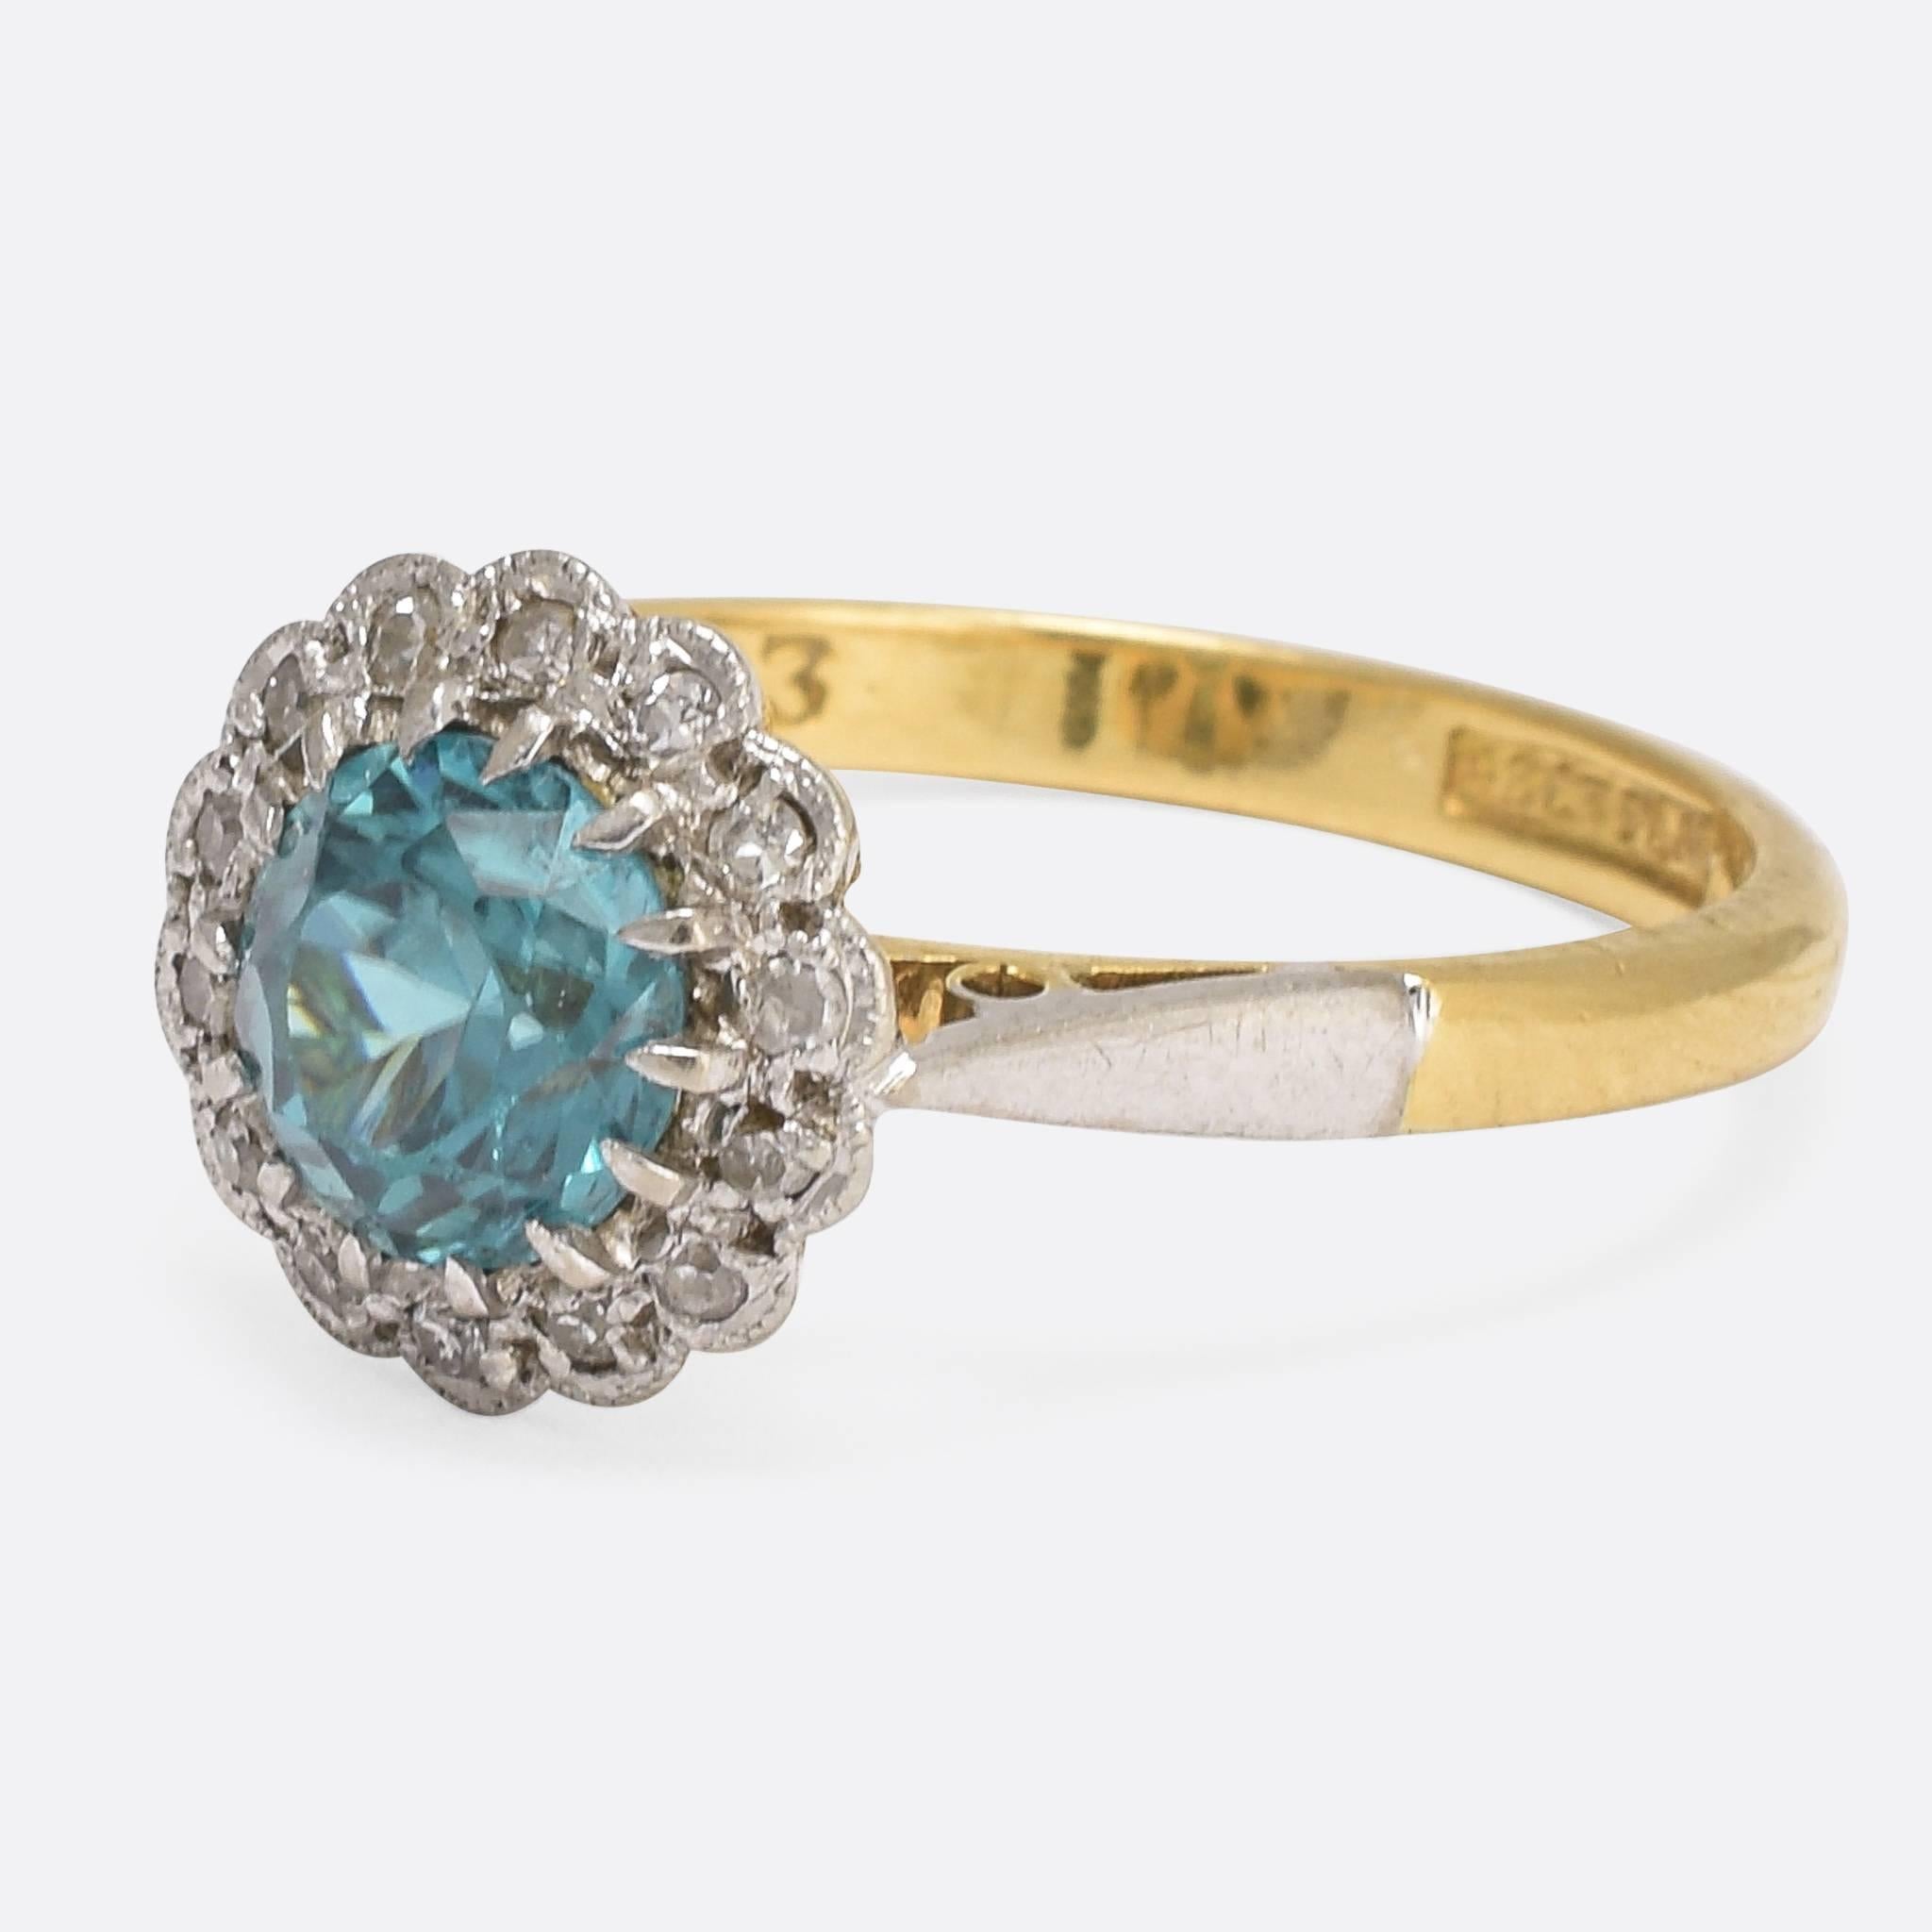 This pretty vintage cluster ring is set with a vibrant blue zircon in the centre of a diamond halo, the settings formed to look like flower petals. In typical Art Deco style, the head and shoulders are finished in platinum, with fine millegrain